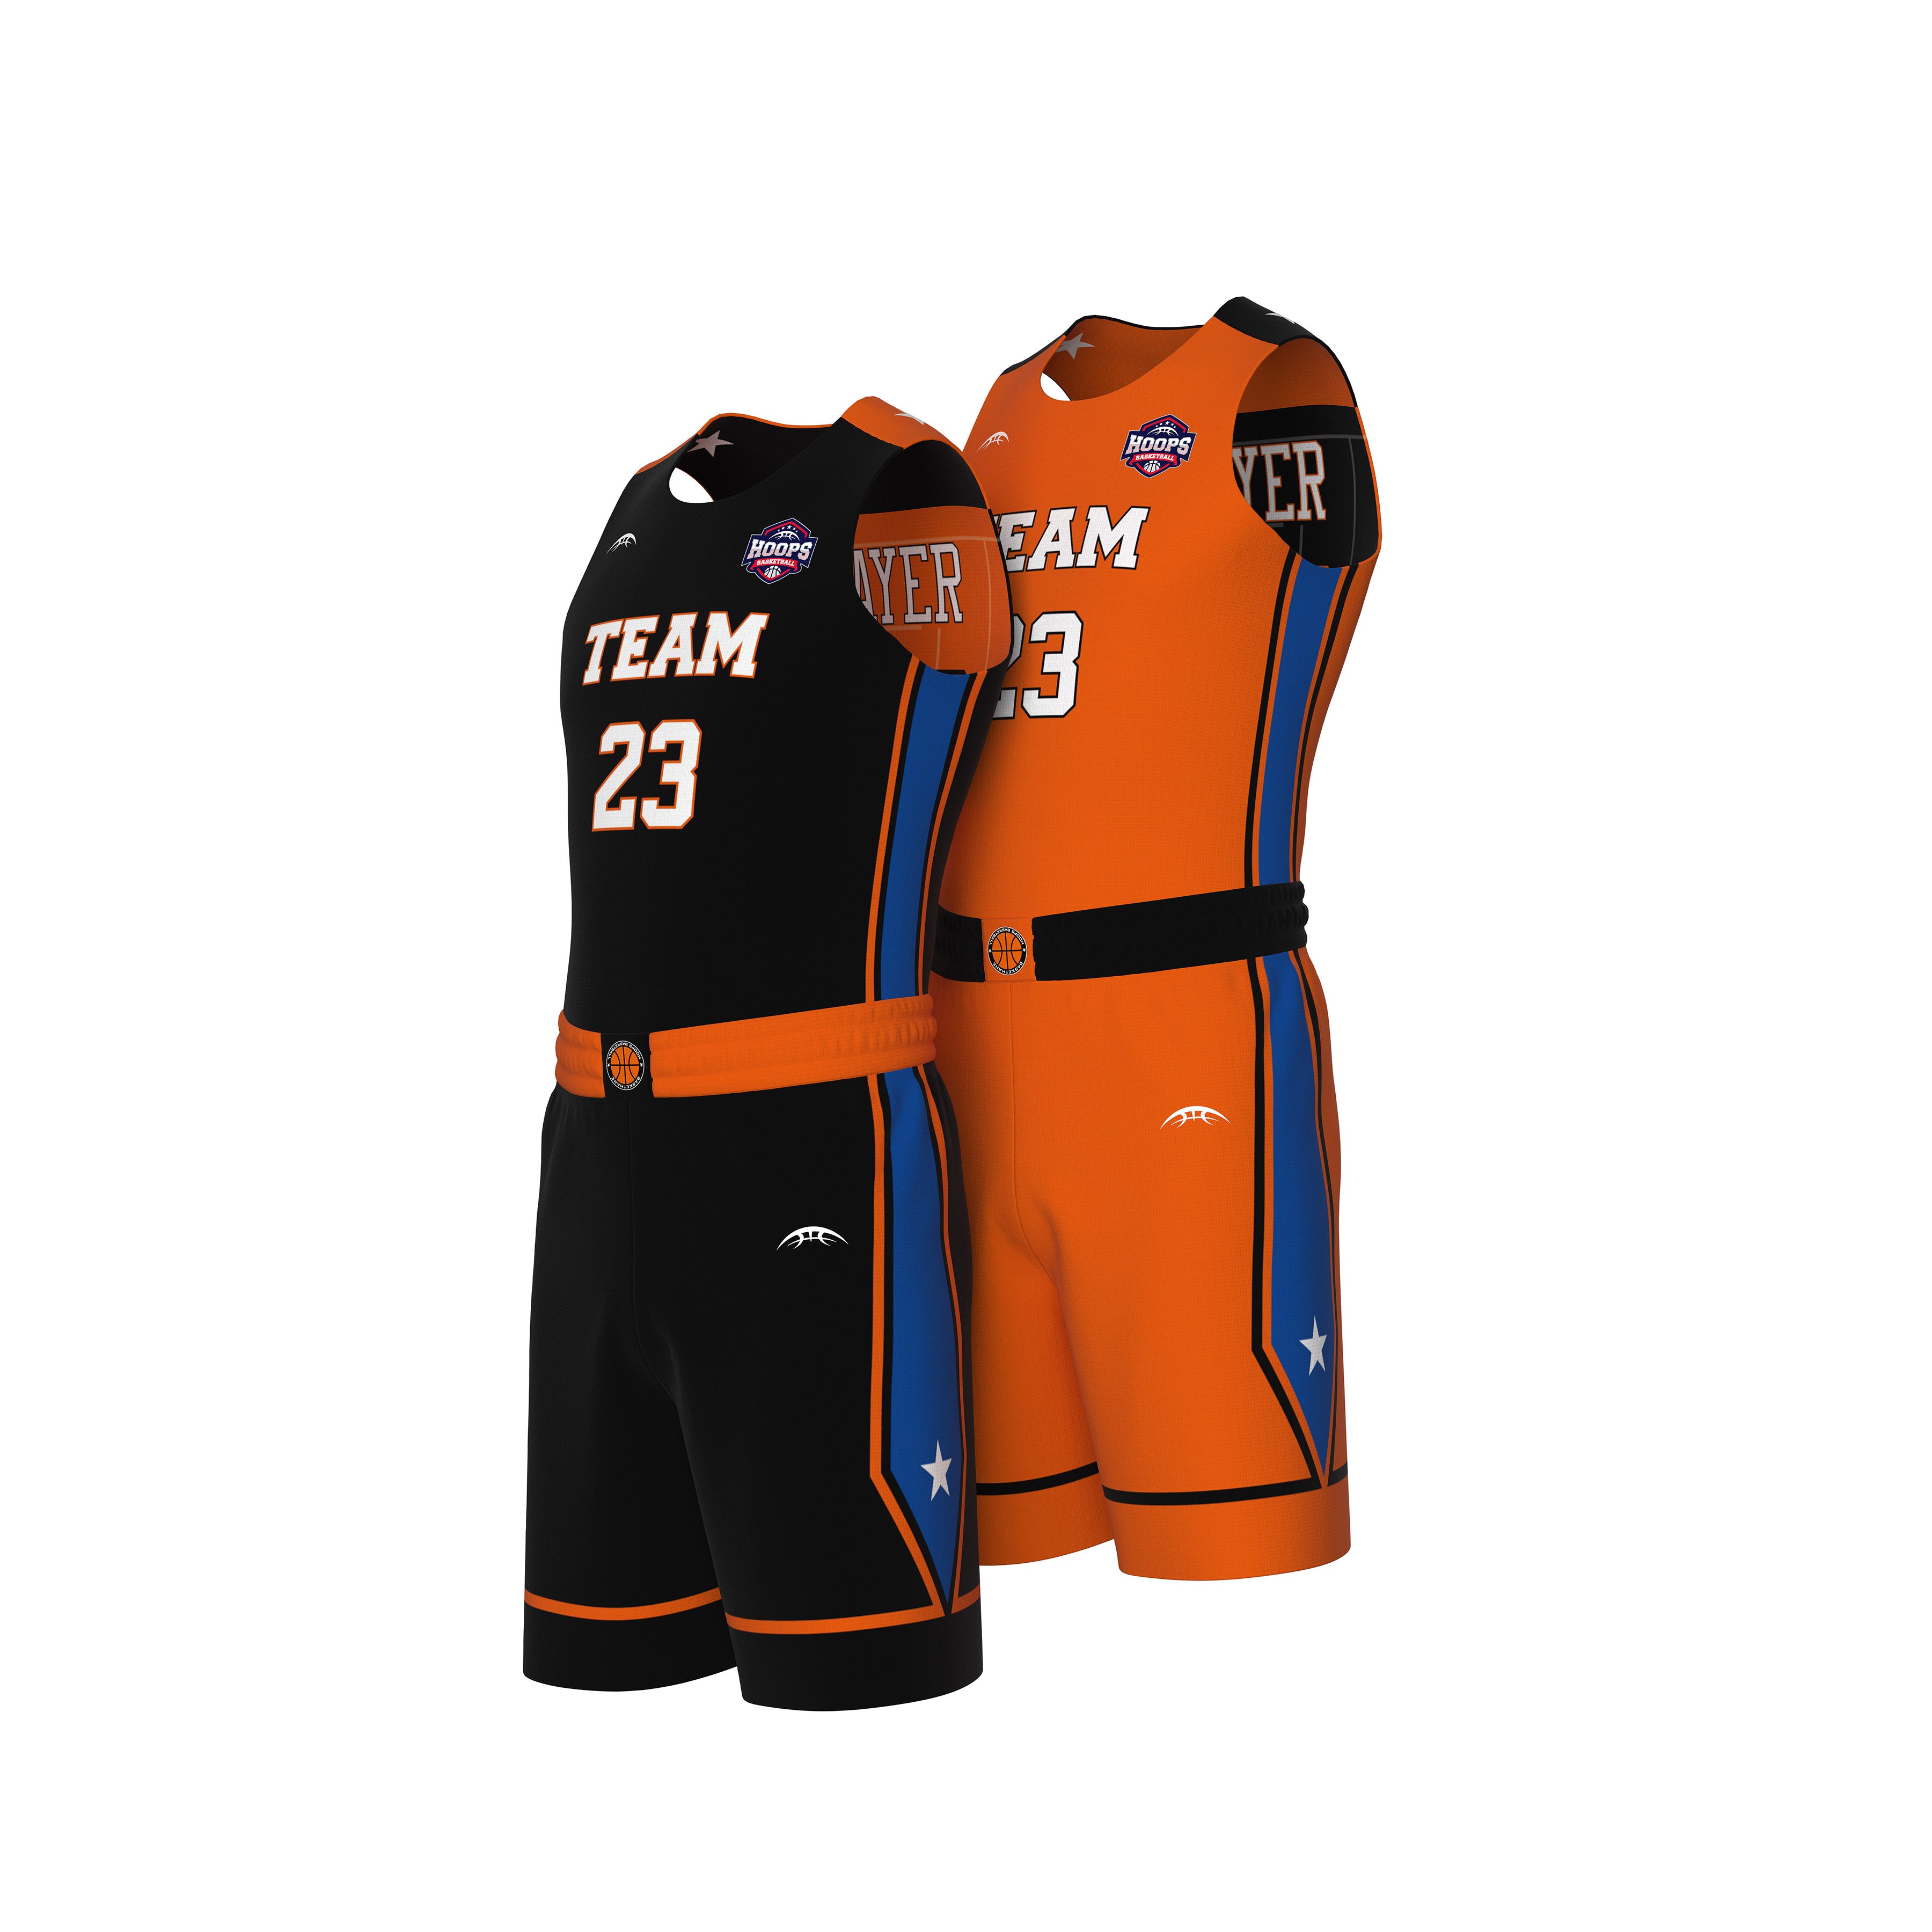 Player Uniform Orange Jersey With A Number 3x3 Basketball Sport